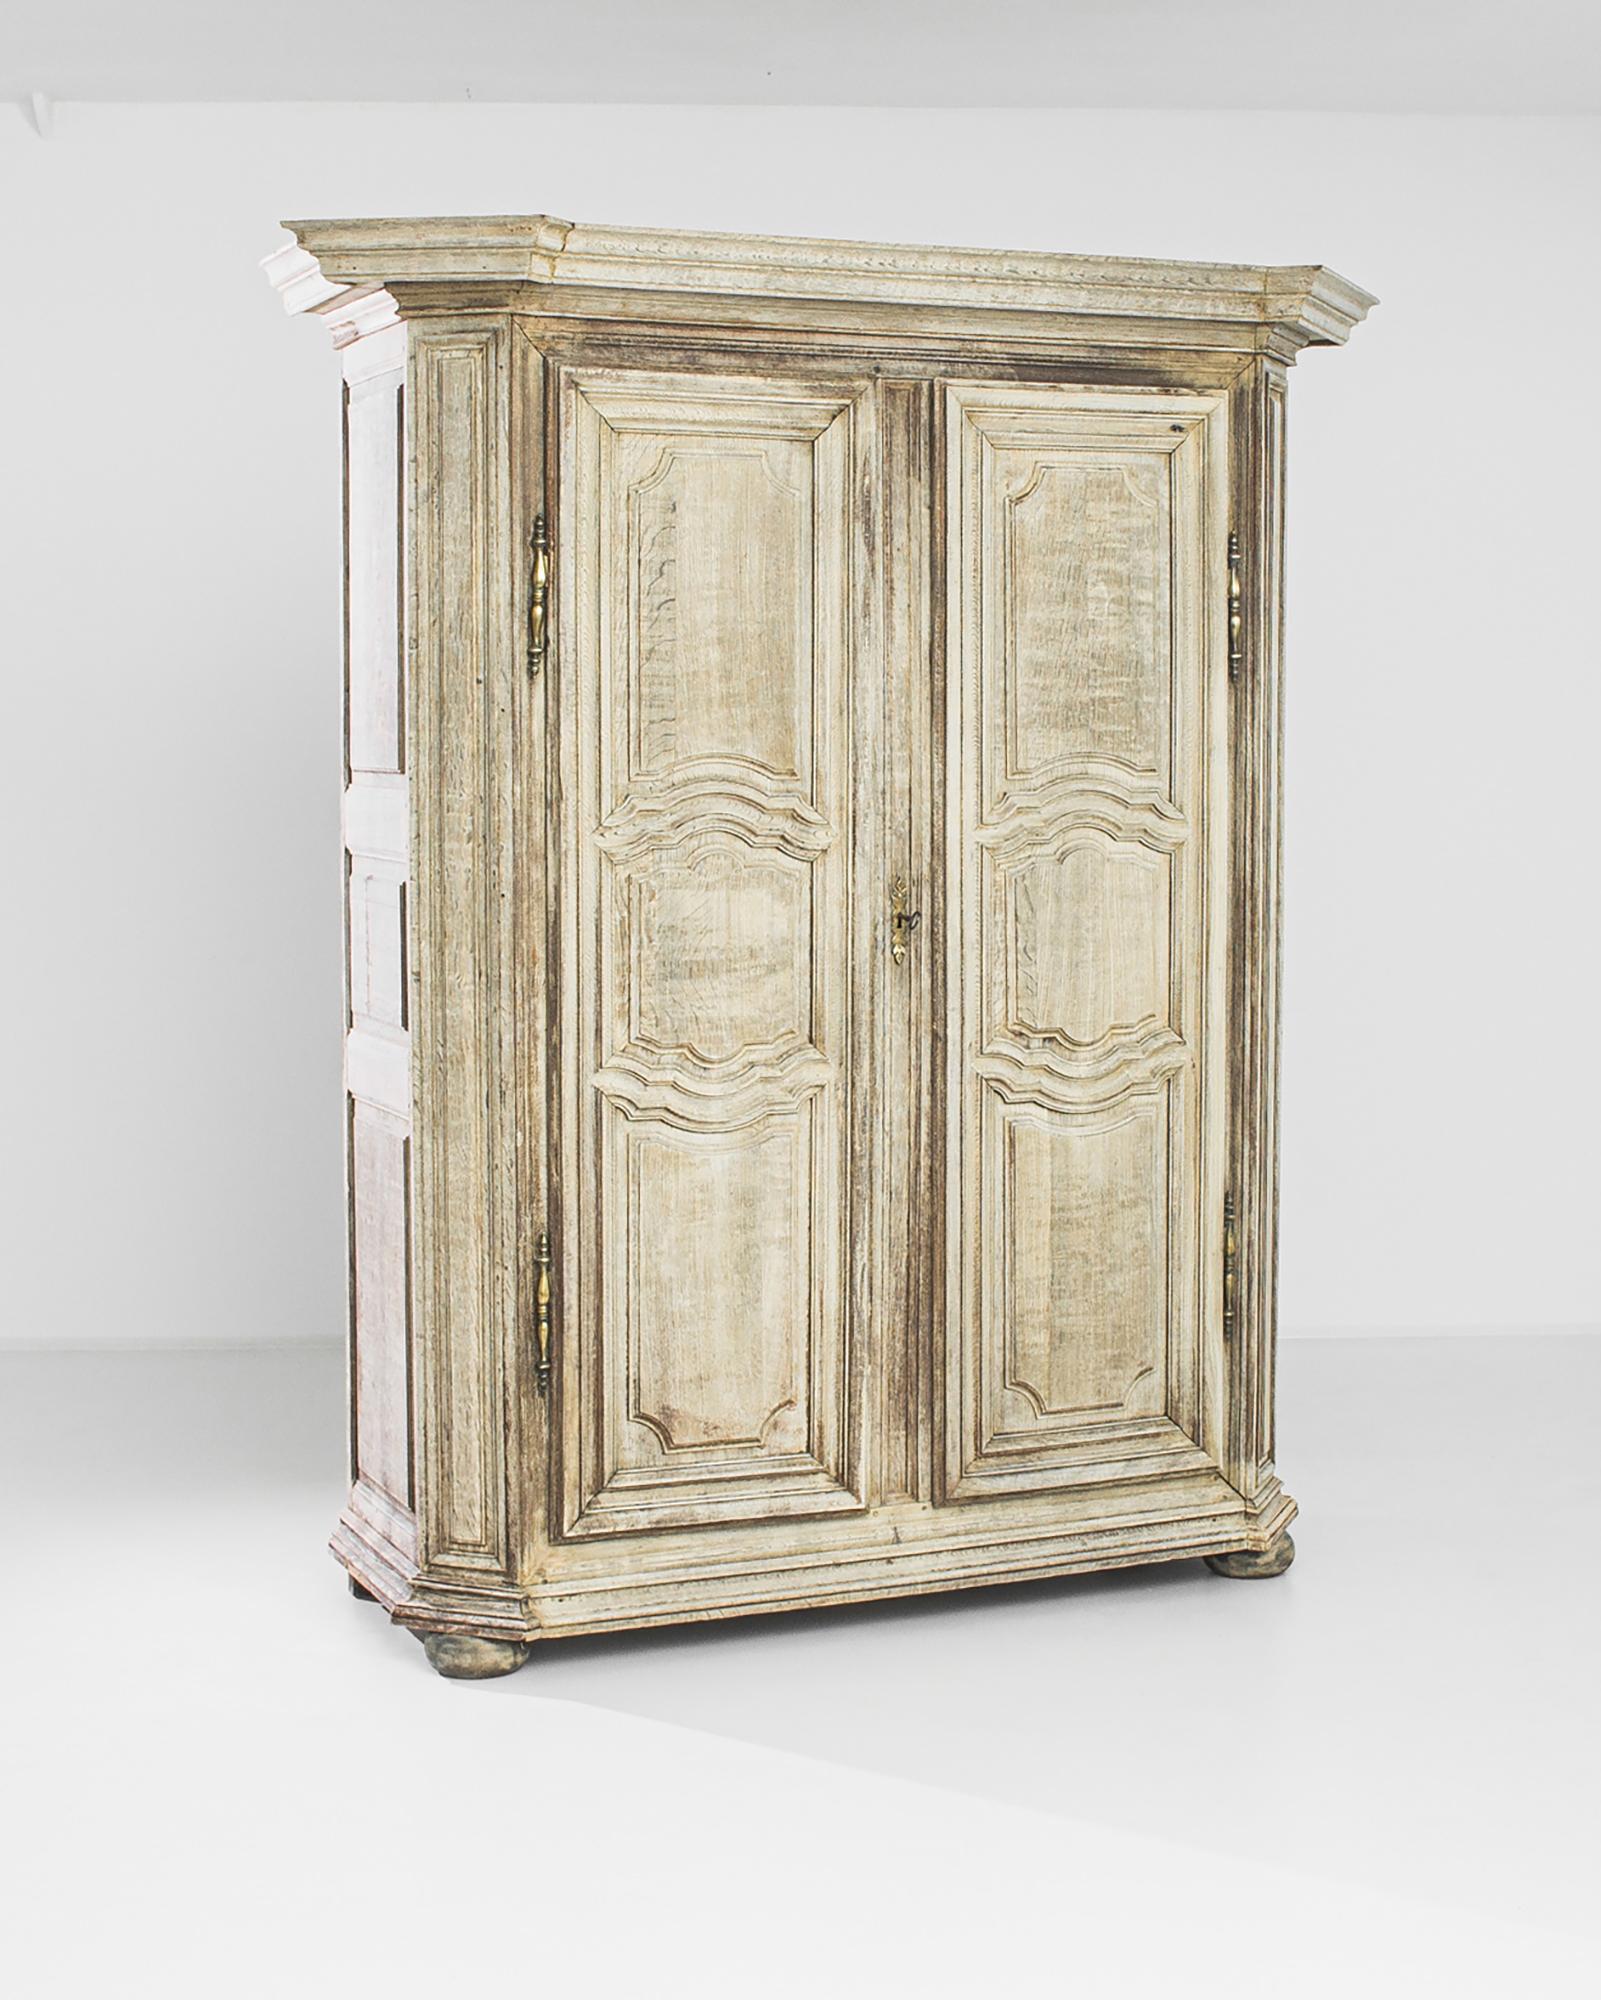 An antique bleached oak cabinet from France, produced circa 1800. A grand wardrobe standing well over seven feet tall, featuring locking double doors with brass hinges and escutcheons. It’s wide base and cornice, in conjunction with the long,